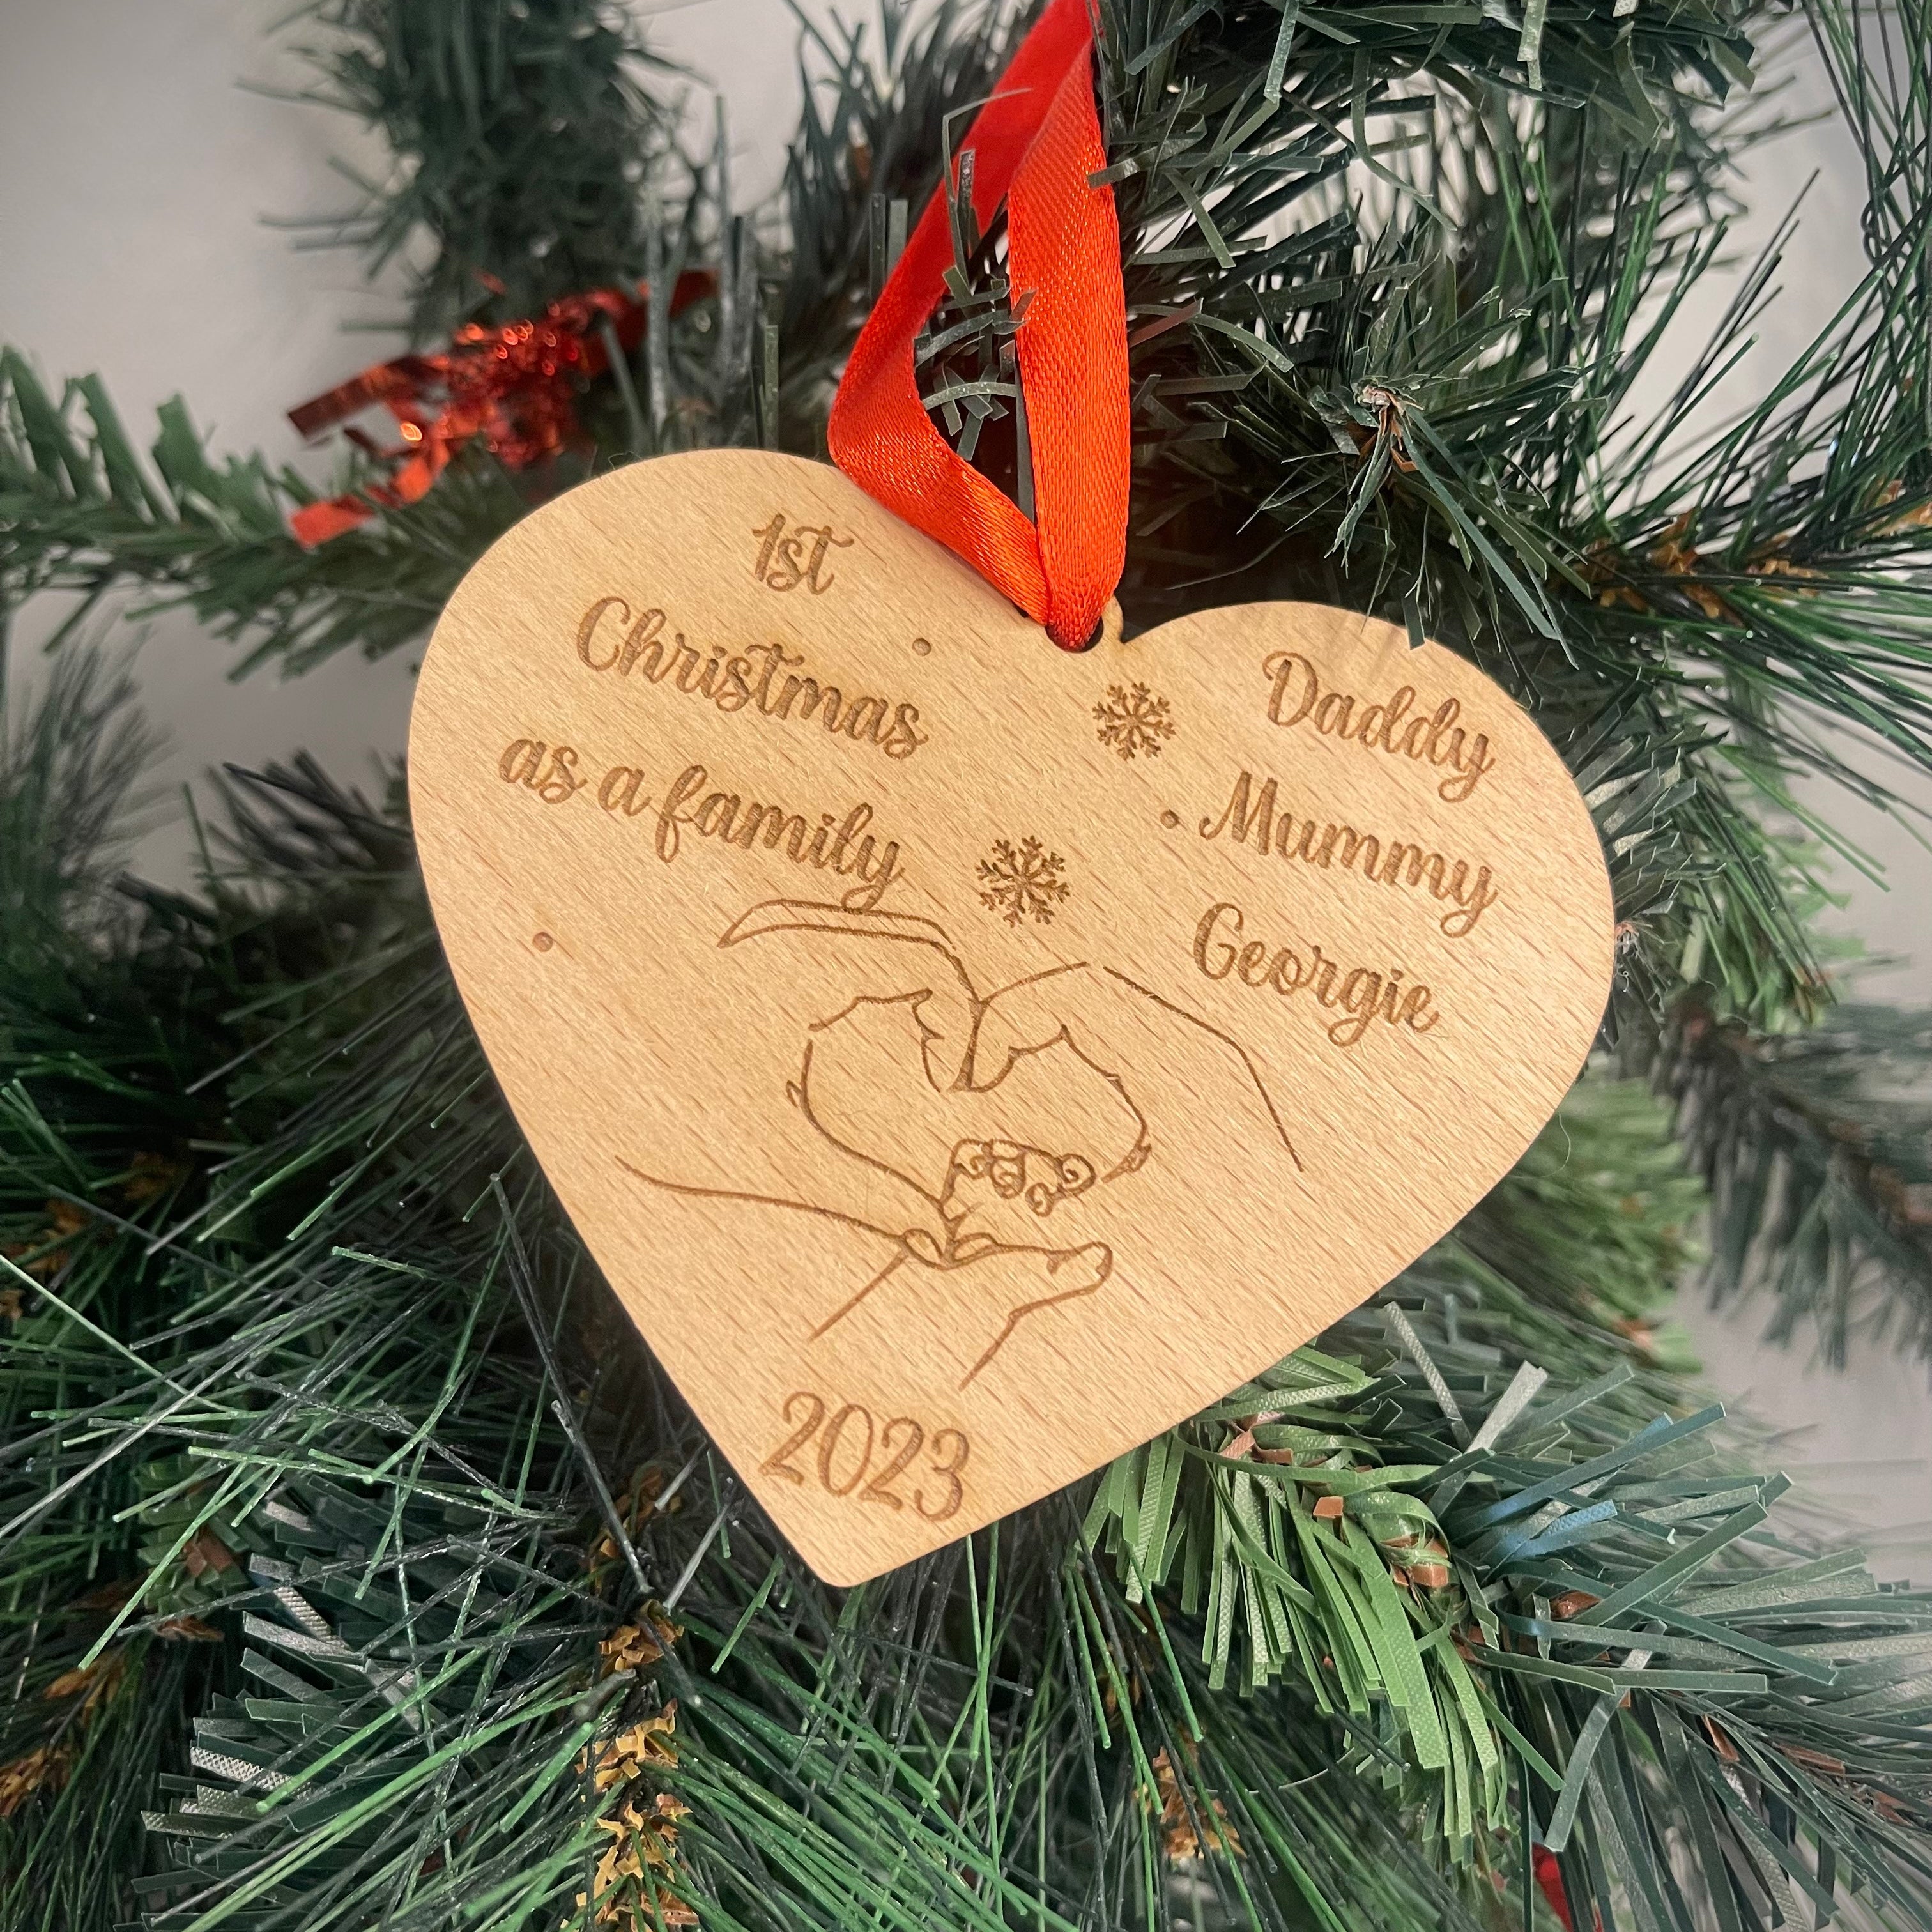 Personalized Wooden Heart Christmas Bauble: Cherish memories with our heart-shaped beech veneer ornament. Engraved '1st Christmas as a Family' with names, featuring intertwined hands, year, and a red ribbon. A heartfelt addition to your festive decor.